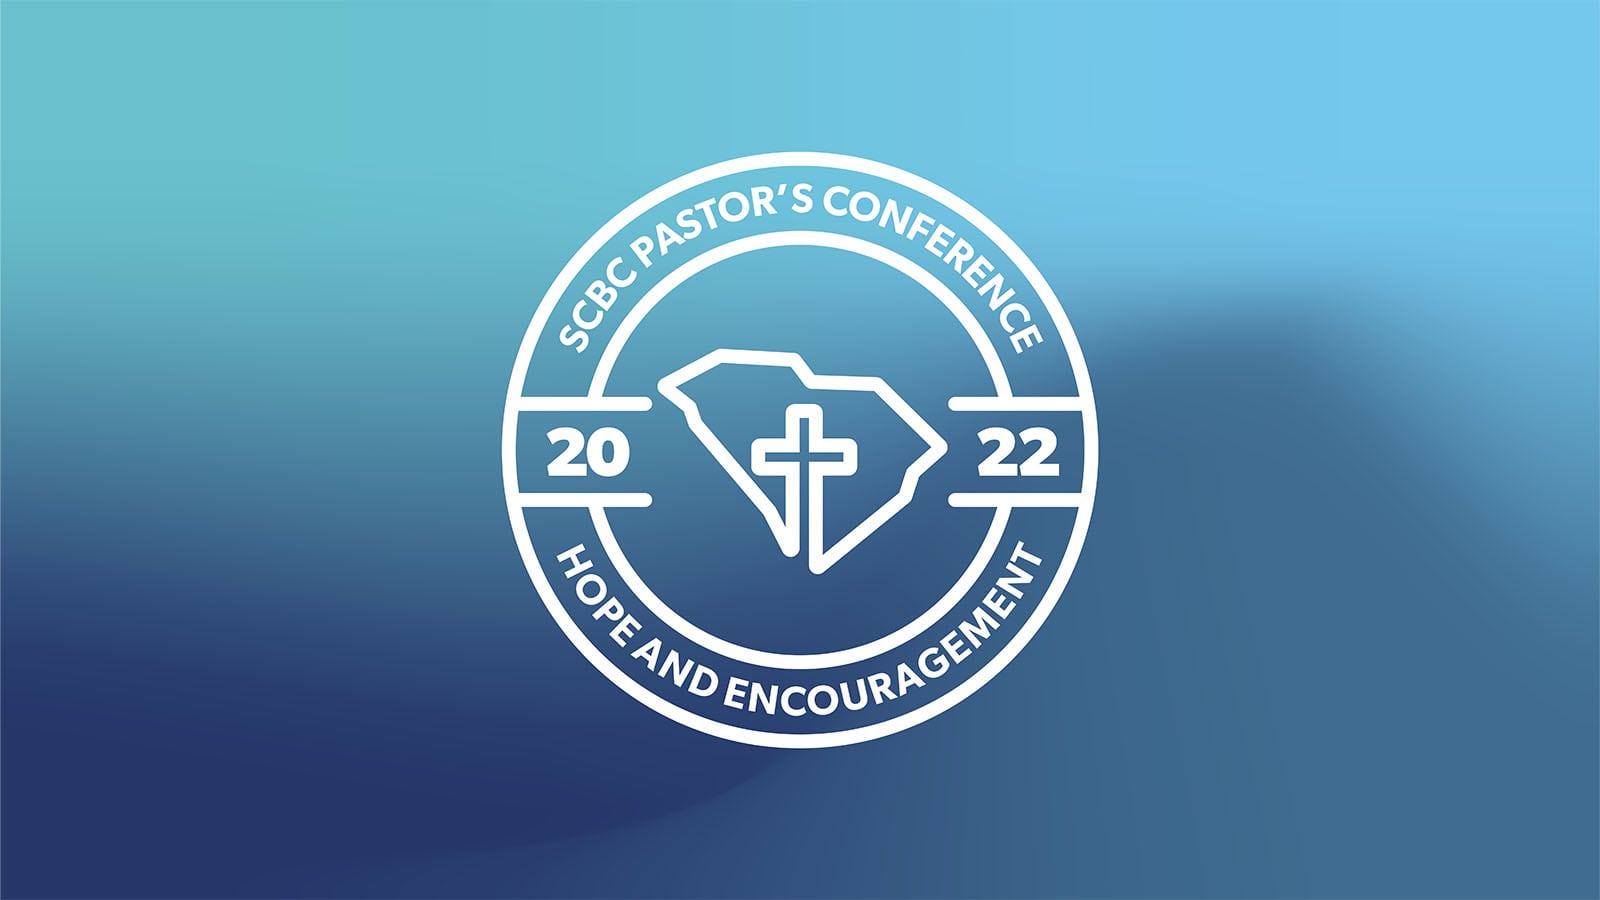 2022 Pastors Conference – Hope and Encouragement